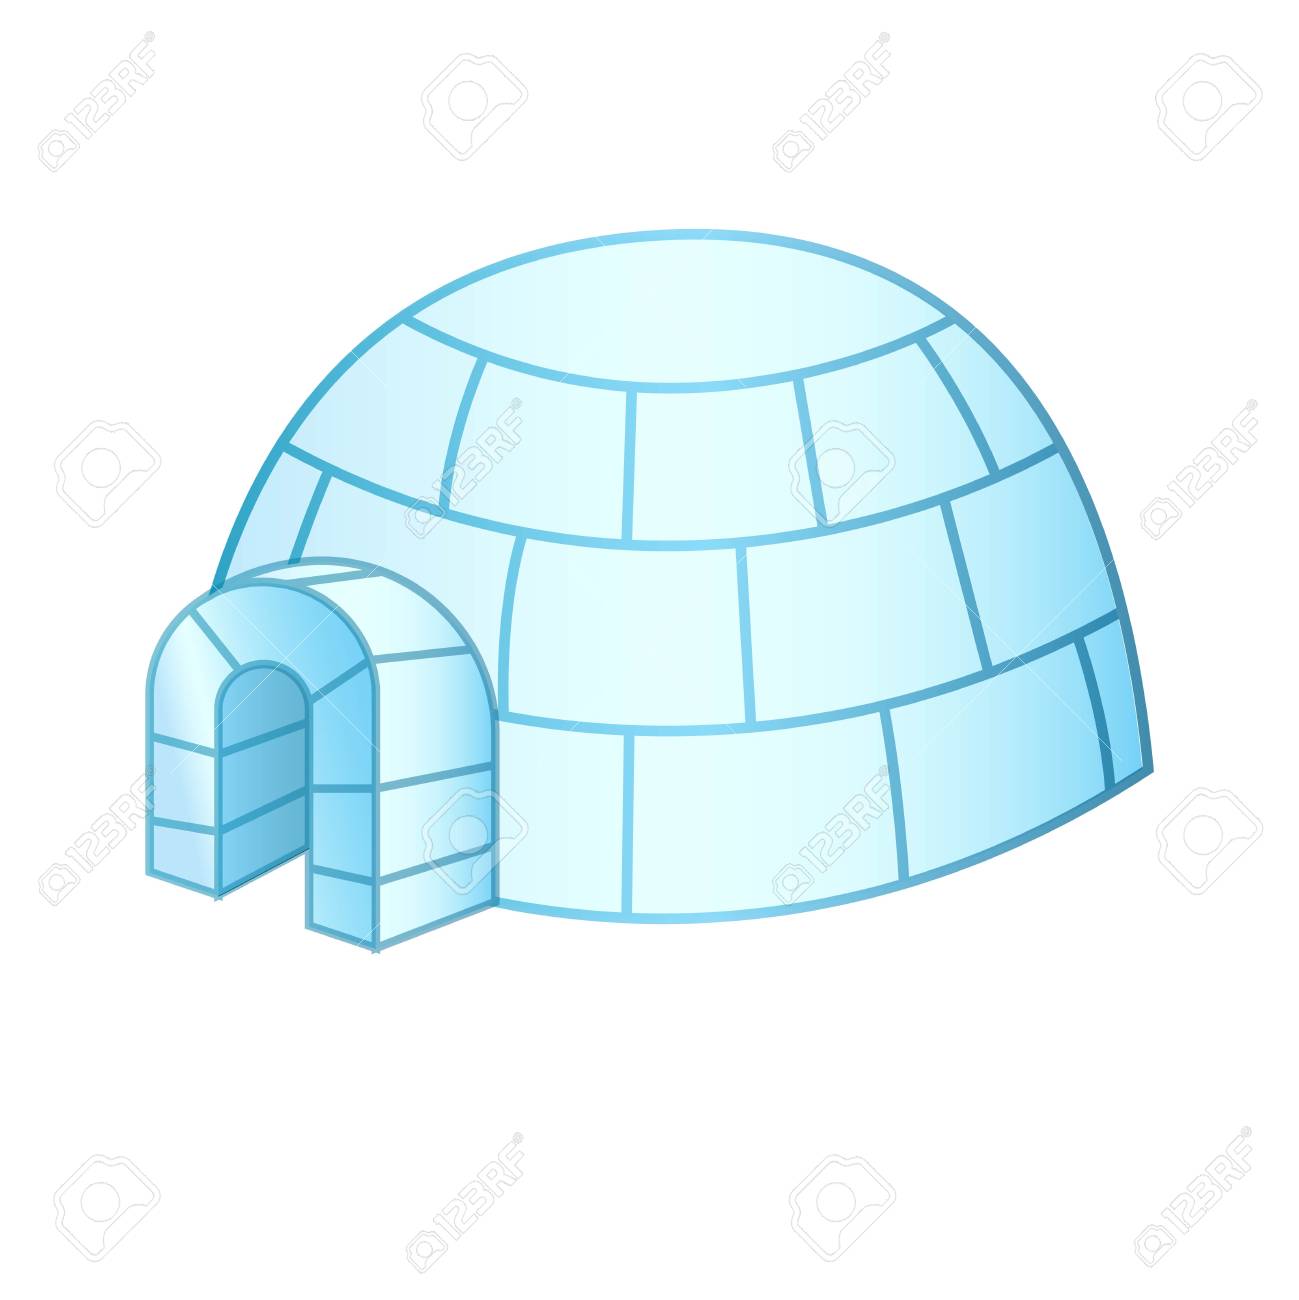 Detail Images Of Igloo House Nomer 10